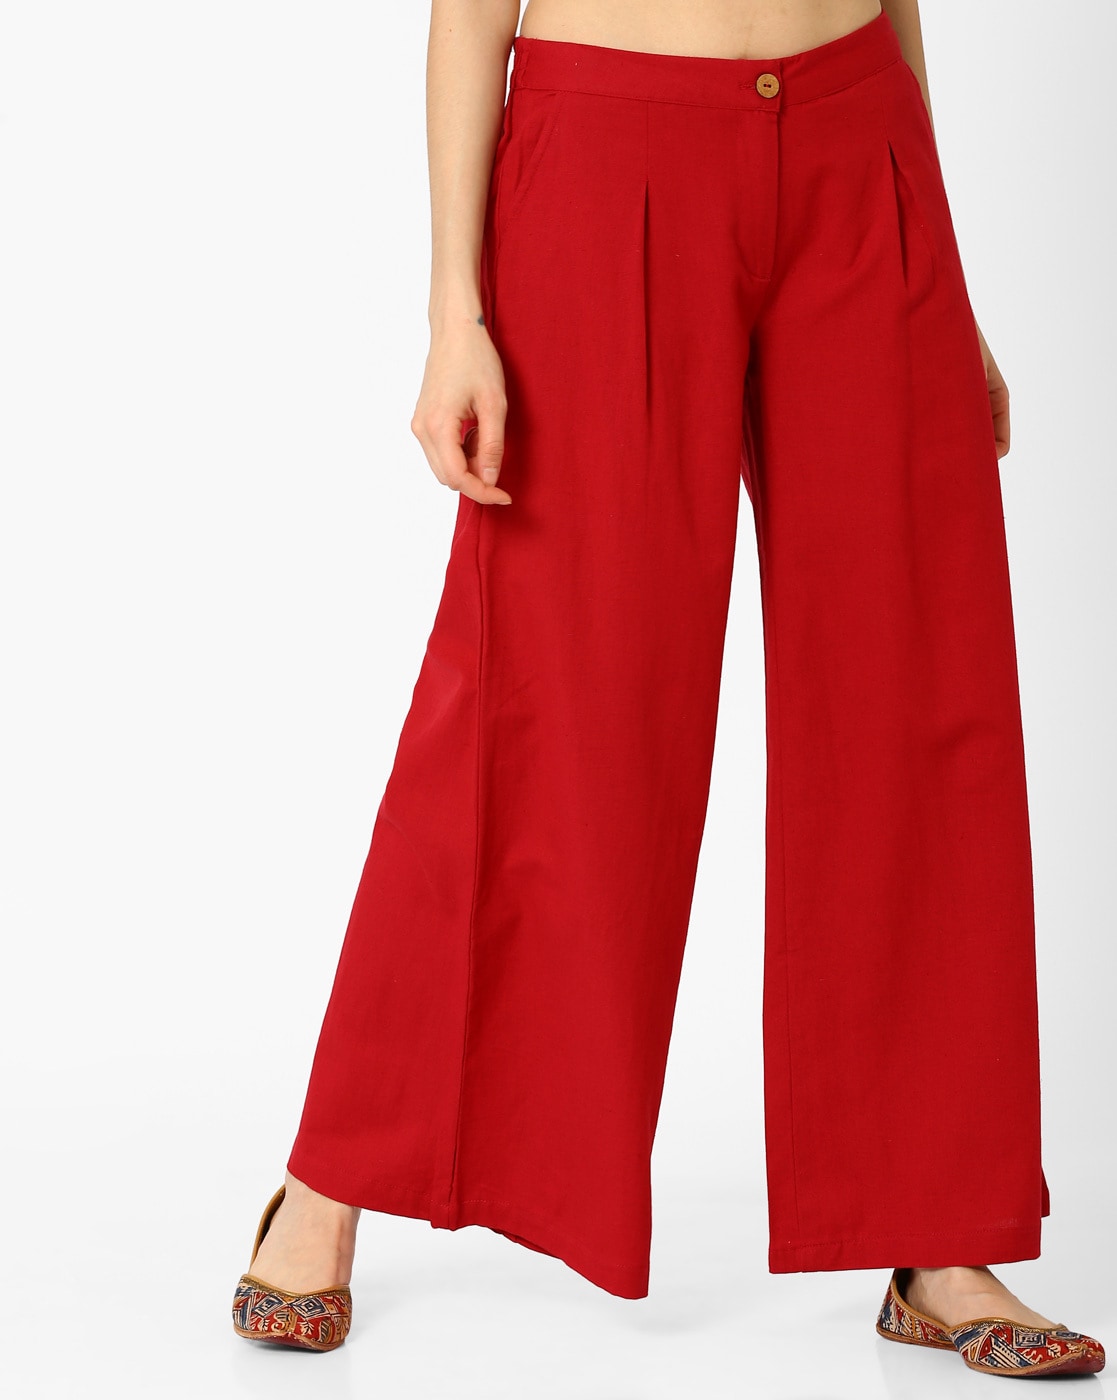 Buy OffWhite Trousers  Pants for Women by Deal Jeans Online  Ajiocom